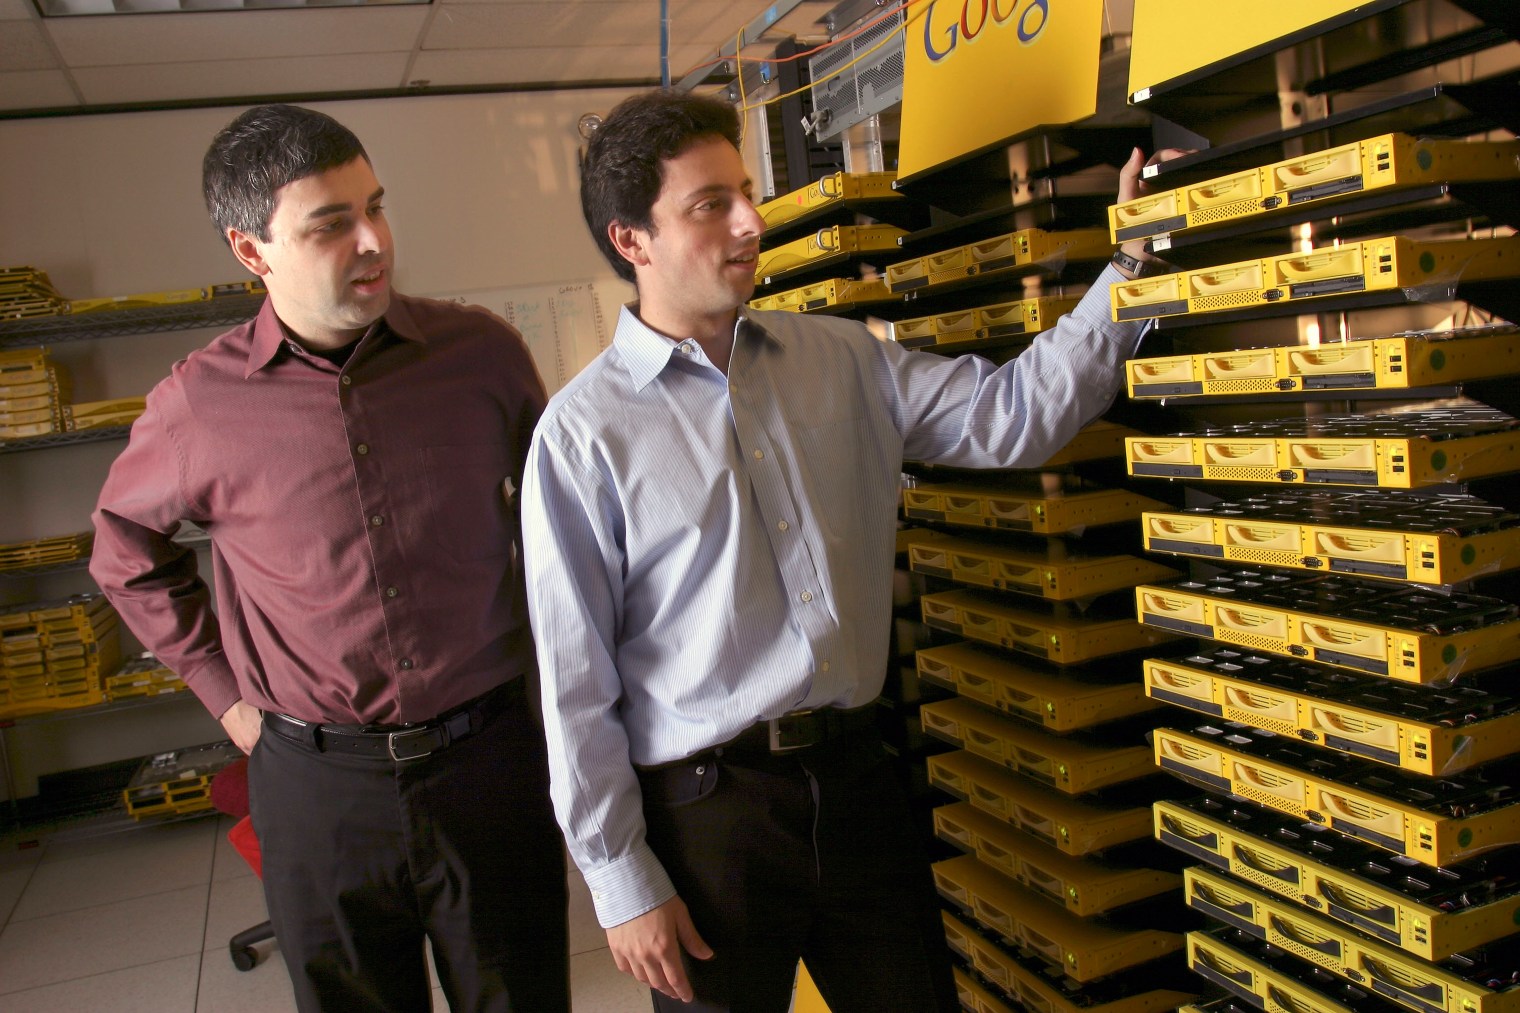 Google co-founders Larry Page, left, and Sergey Brin, at their campus headquarters in Mountain View, Calif., 2003.